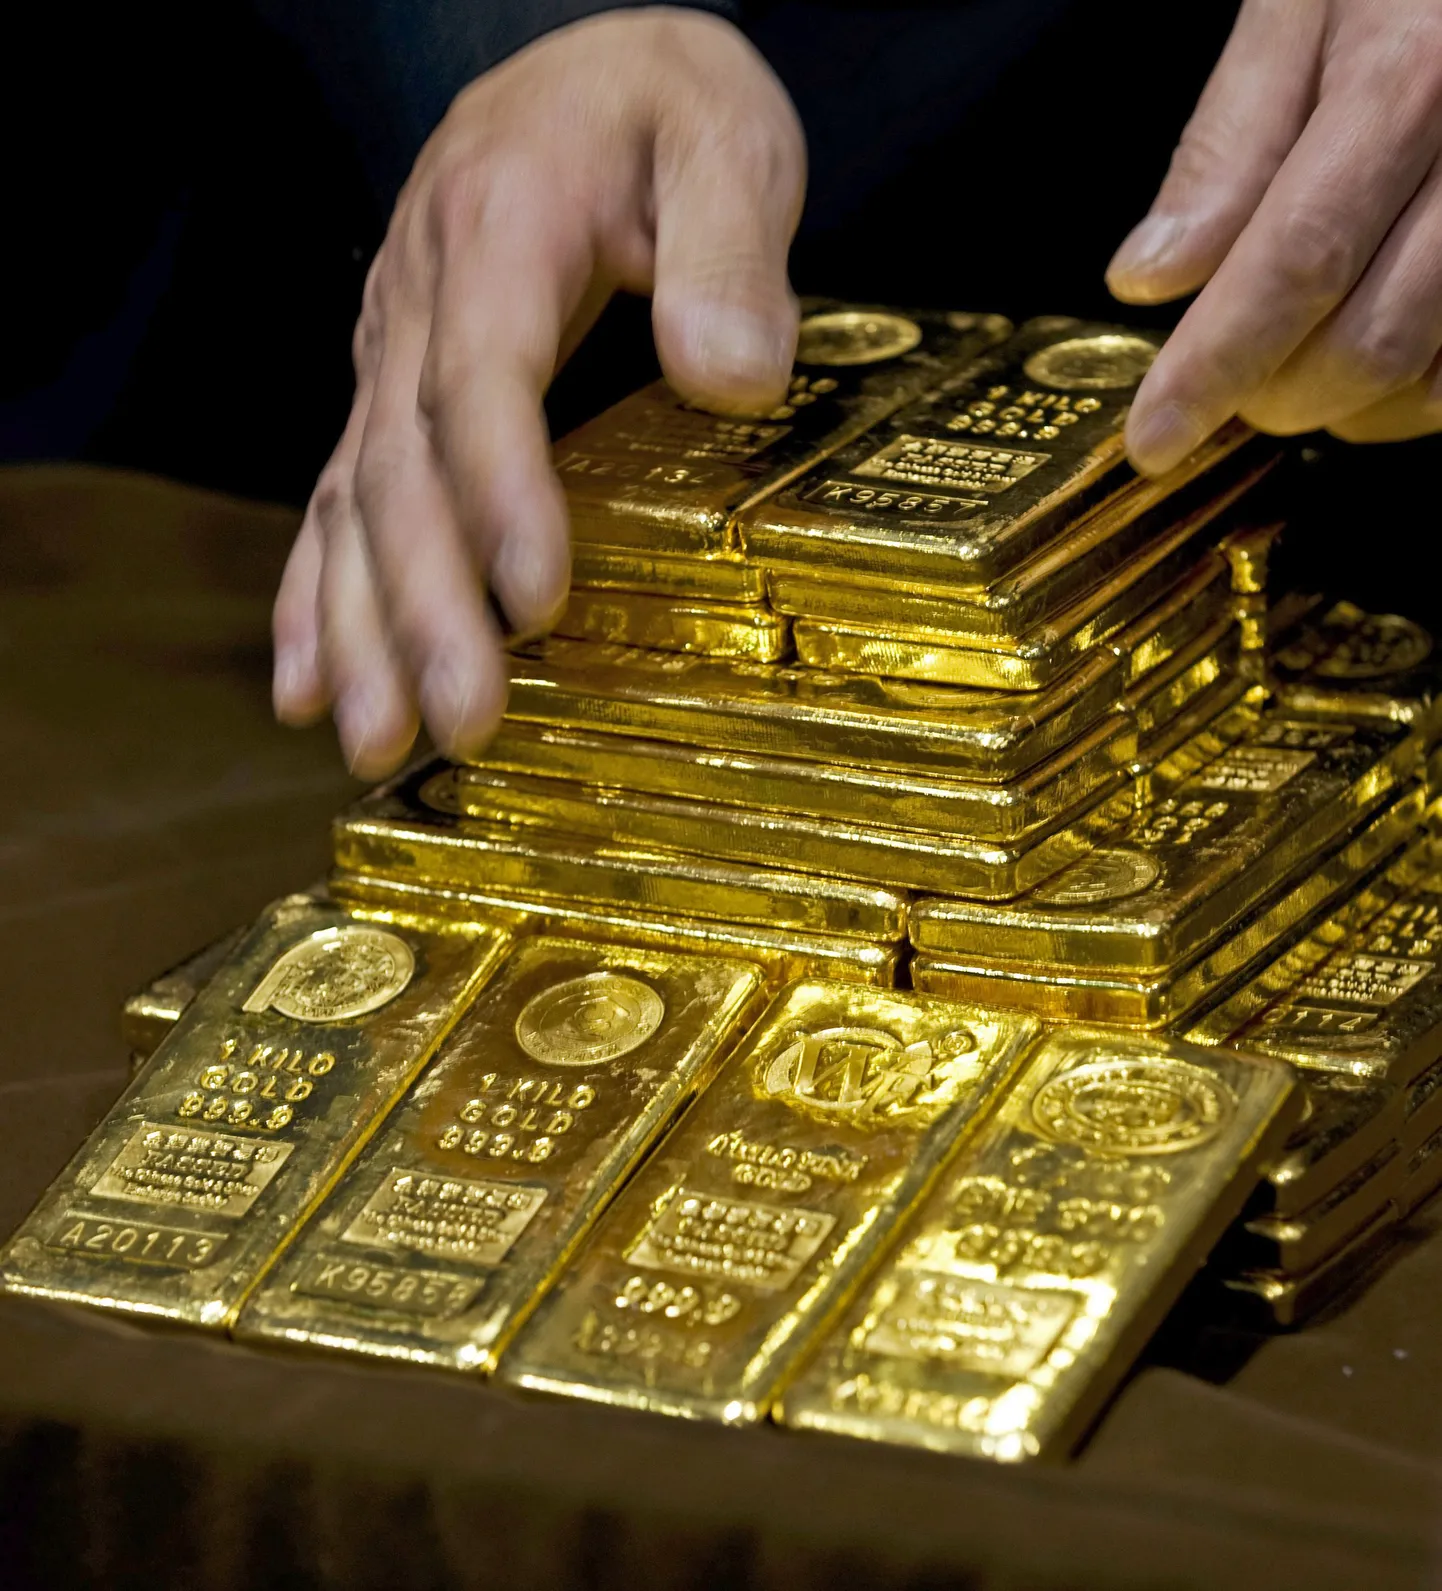 FILE - In an Oct. 17, 2011, file photo a staff member displays gold bullion bars during a news conference at the Chinese Gold and Silver Exchange Society in Hong Kong. A new study based on observations from space suggests the gold on Earth came from colliding dead stars in a cataclysmic event that occurred long ago. The research by the Harvard-Smithsonian Center for Astrophysics will appear in a future issue of the Astrophysical Journal Letters. (AP Photo, File) / SCANPIX Code: 436